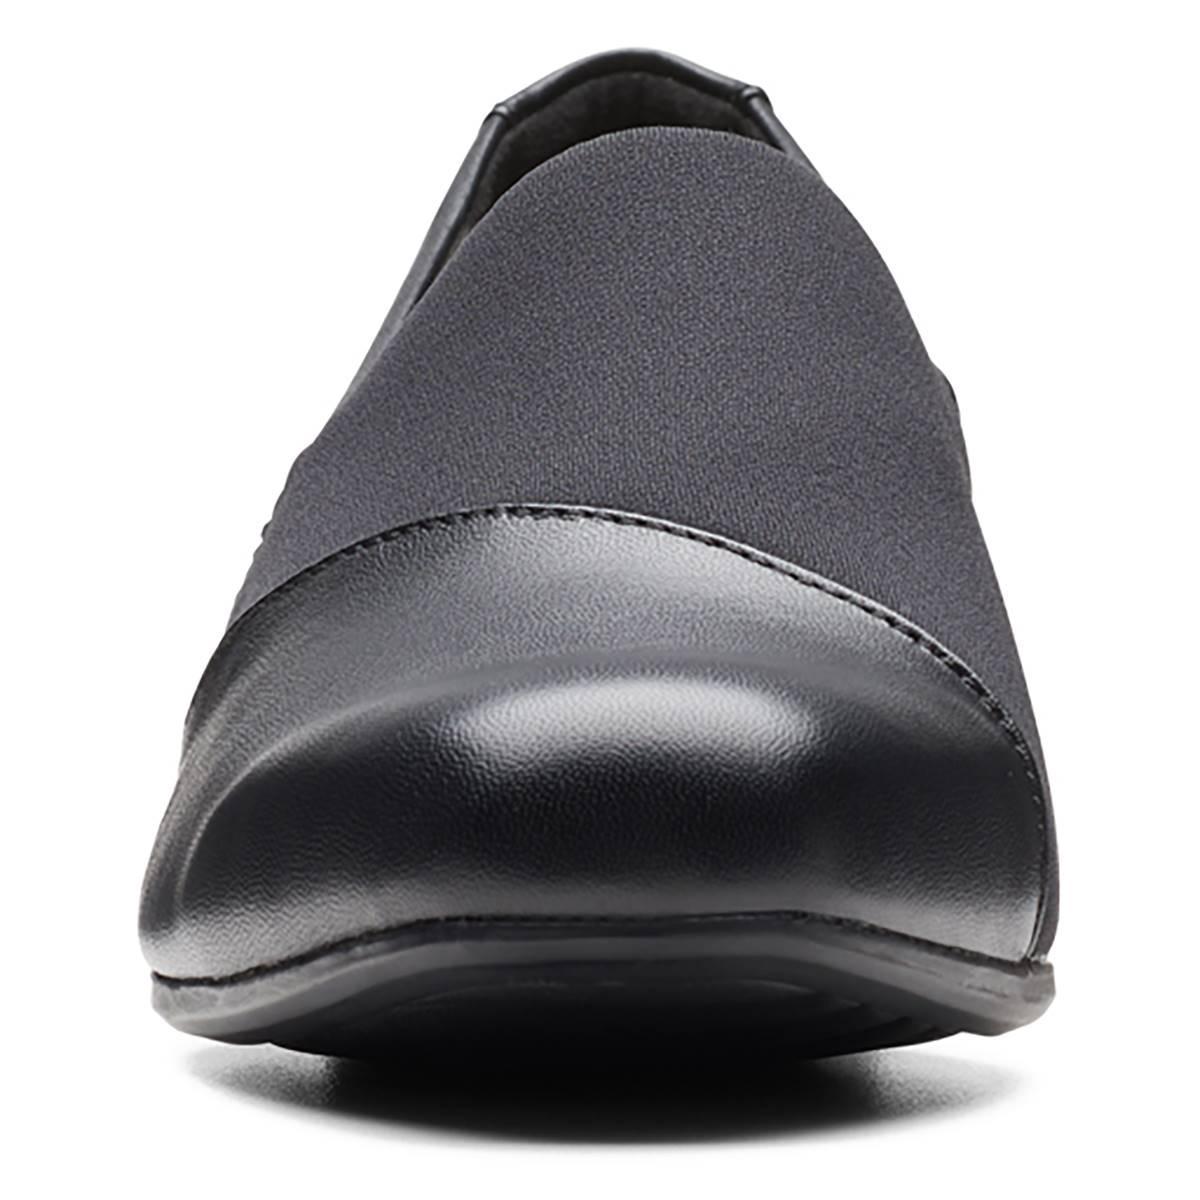 Bruno Magli Silas Penny Loafer Product Image